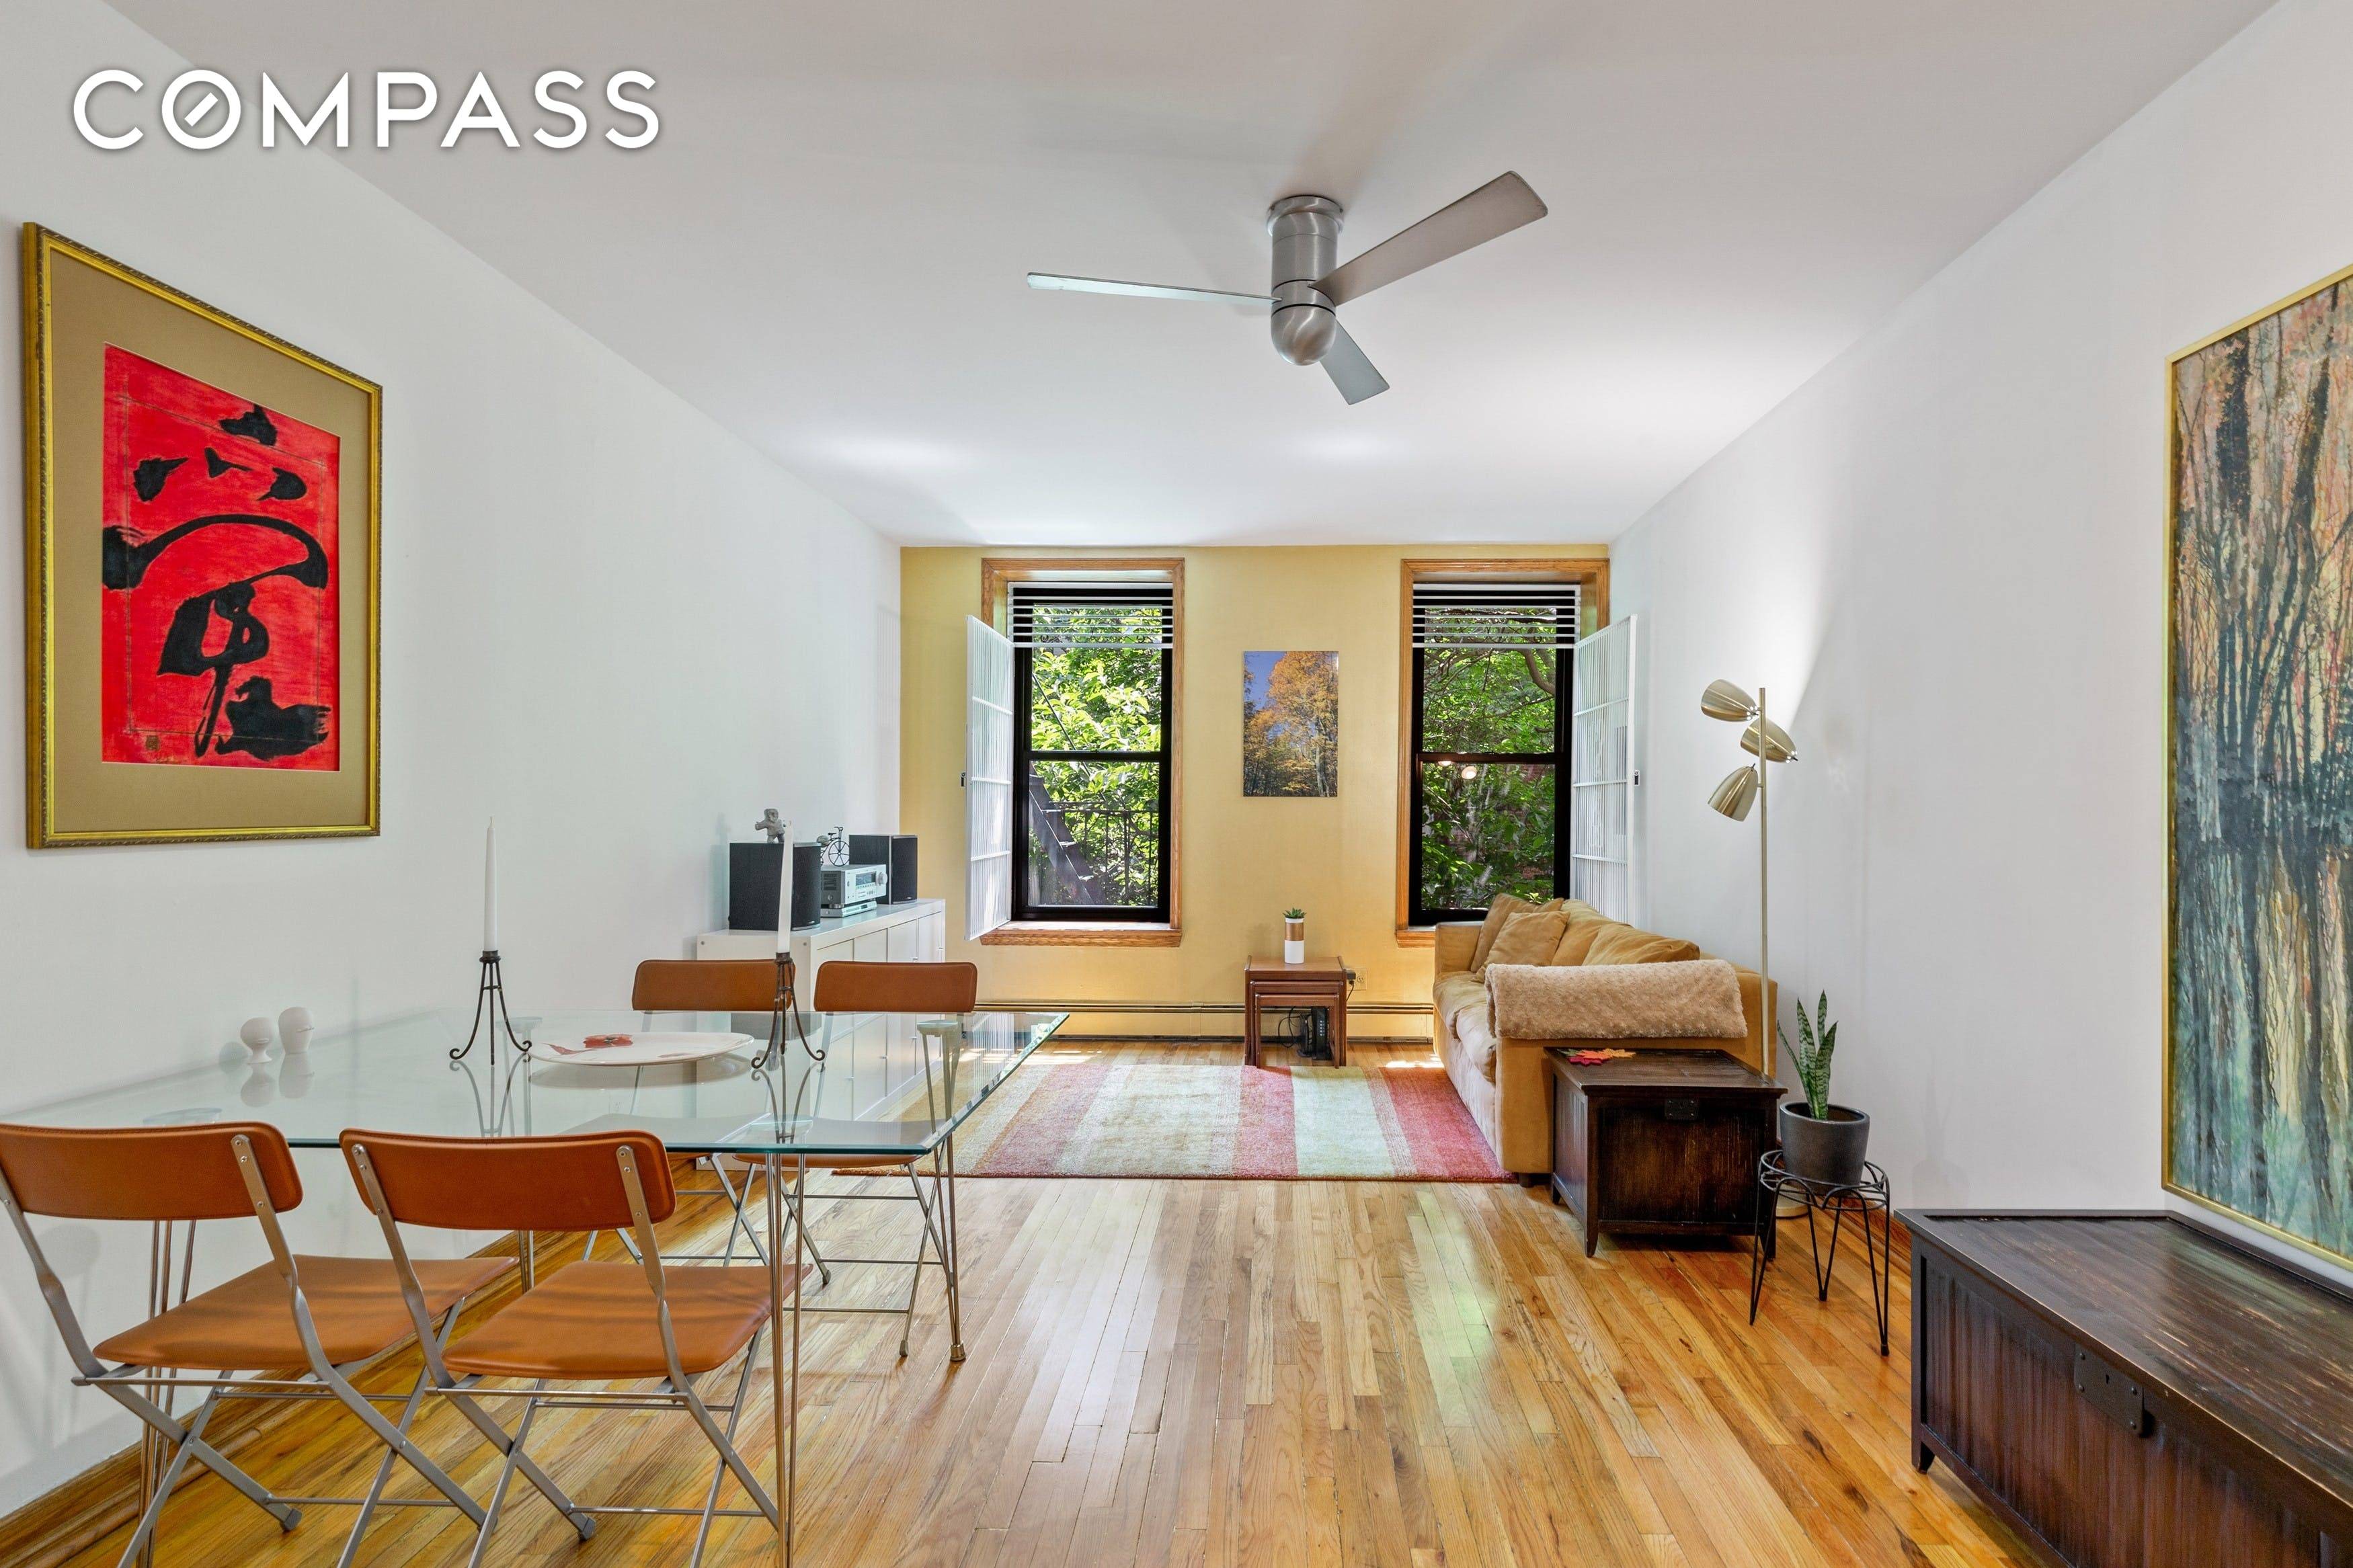 OASIS BY THE PARK Live surrounded by nature and beauty in this over sized one bedroom near Morningside Park.